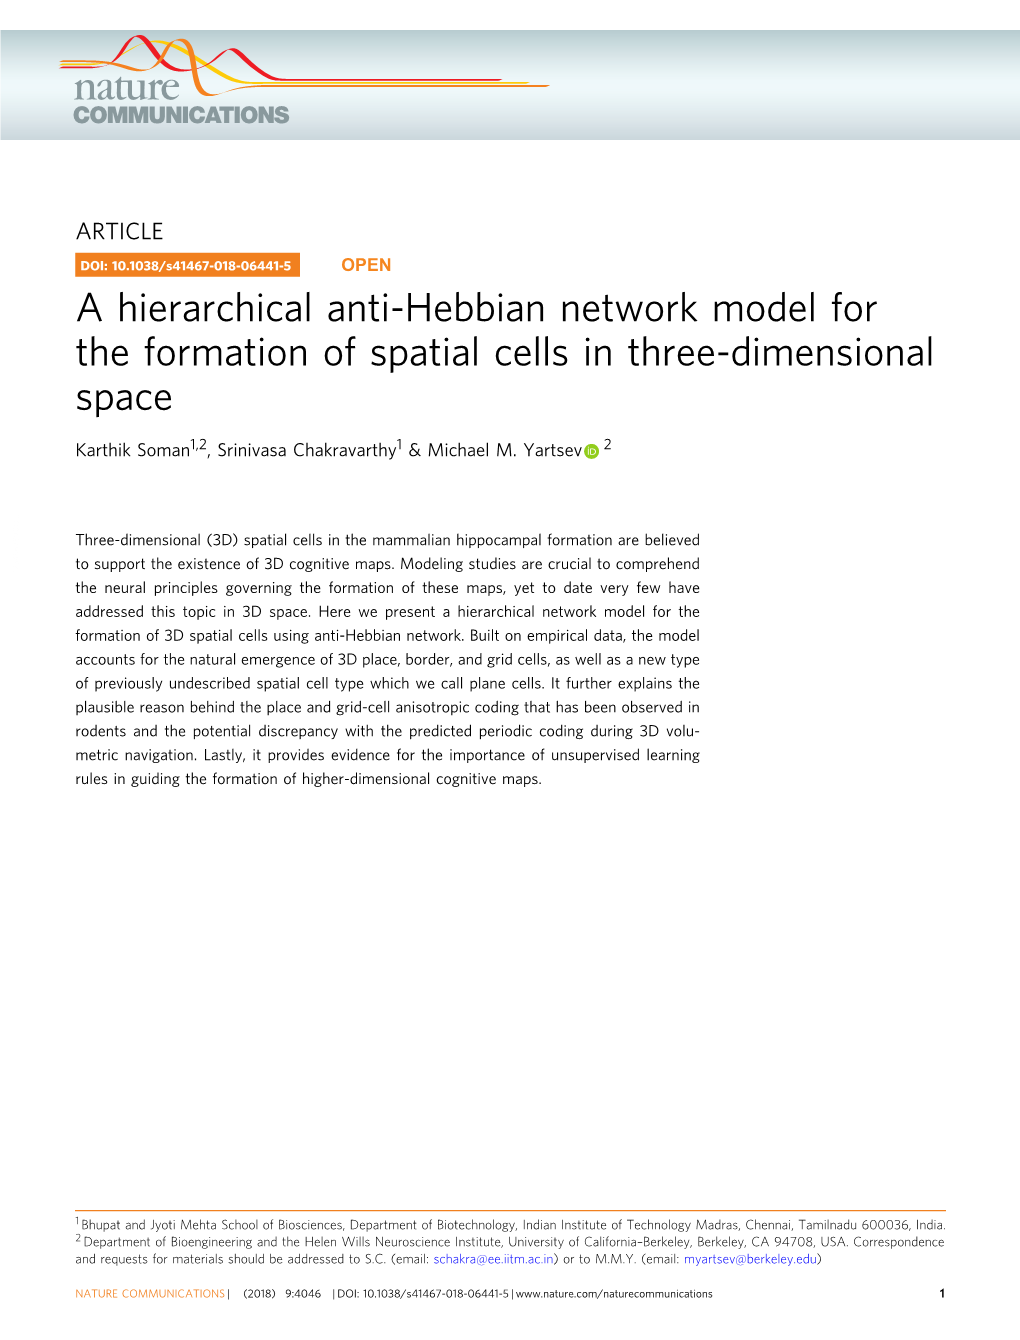 A Hierarchical Anti-Hebbian Network Model for the Formation of Spatial Cells in Three-Dimensional Space